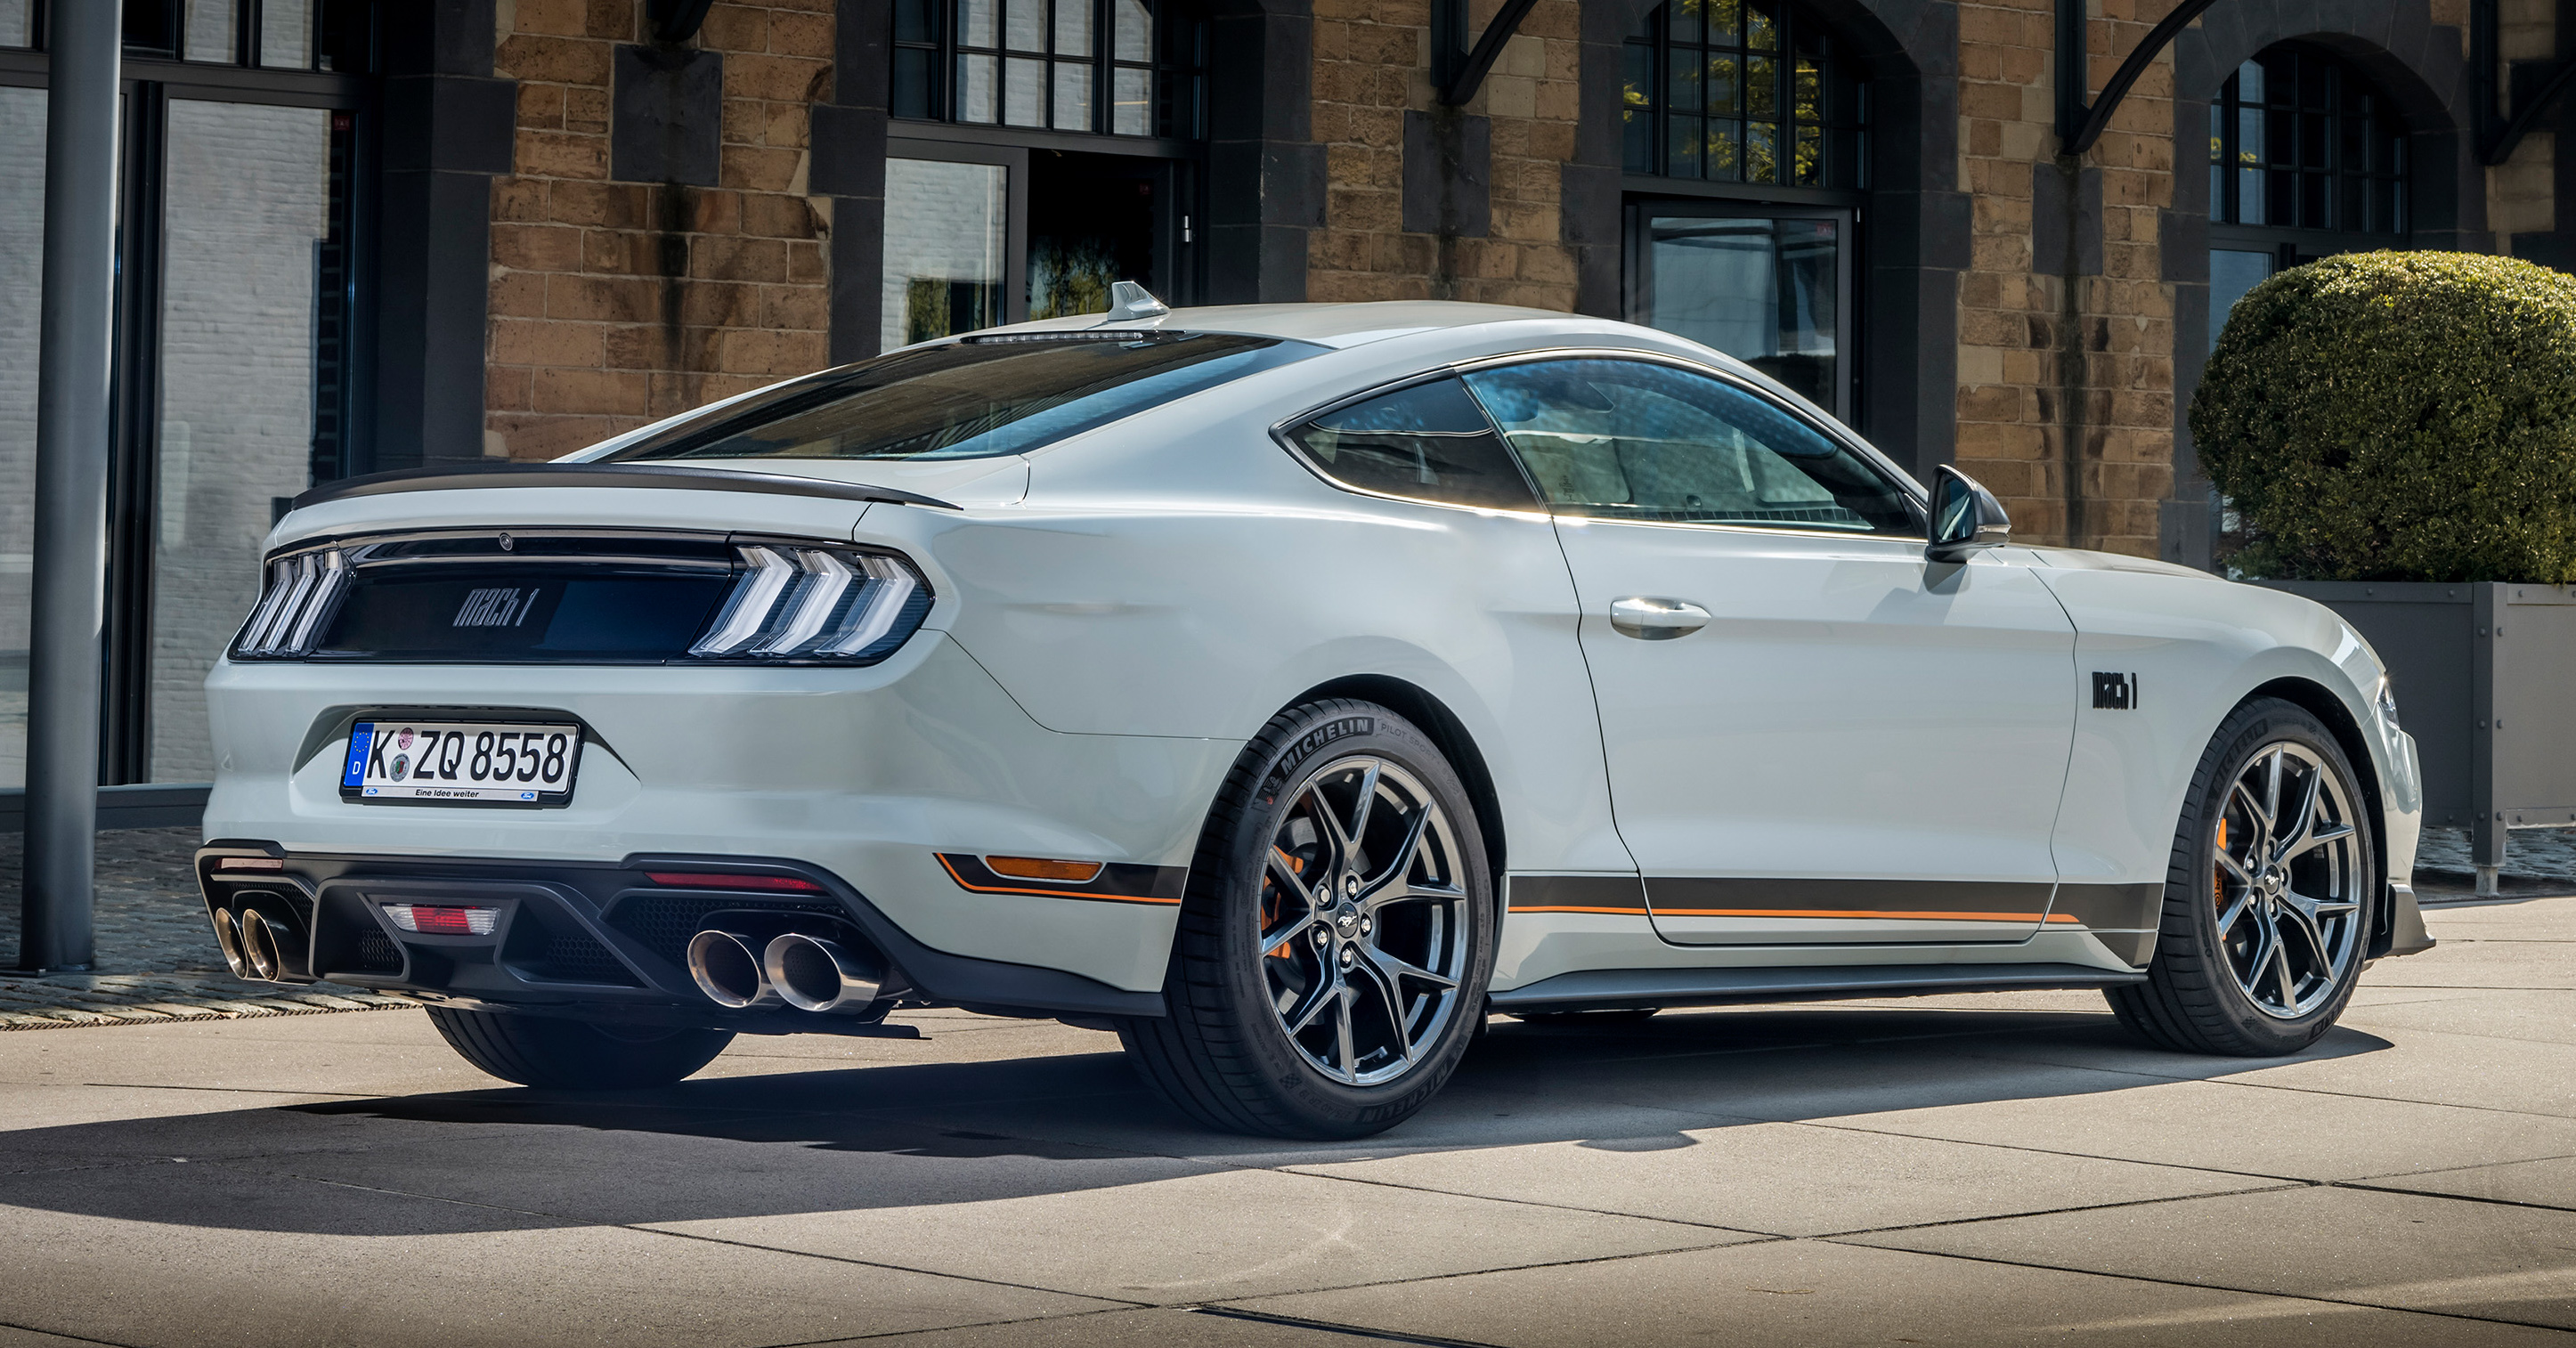 2021 Ford Mustang Mach 1 Exterior - Paul Tan's Automotive News